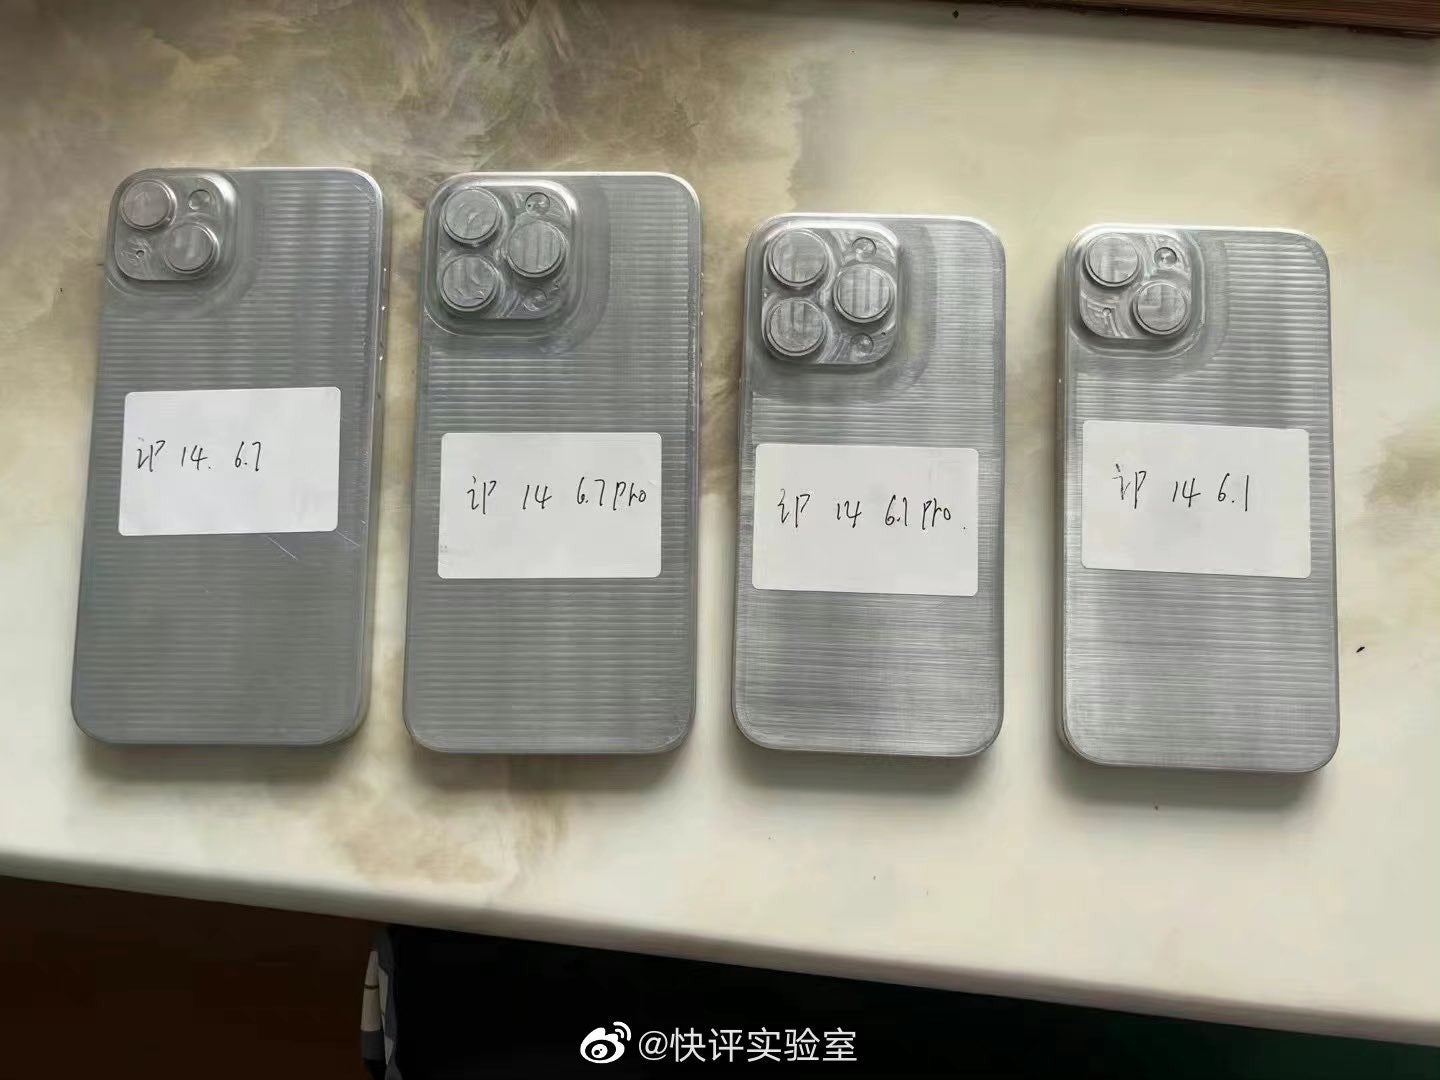 Alleged photo of molds for all iPhone 14 models and their sizes - iPhone 14 molds pop up online, revealing sizes and the four alleged models